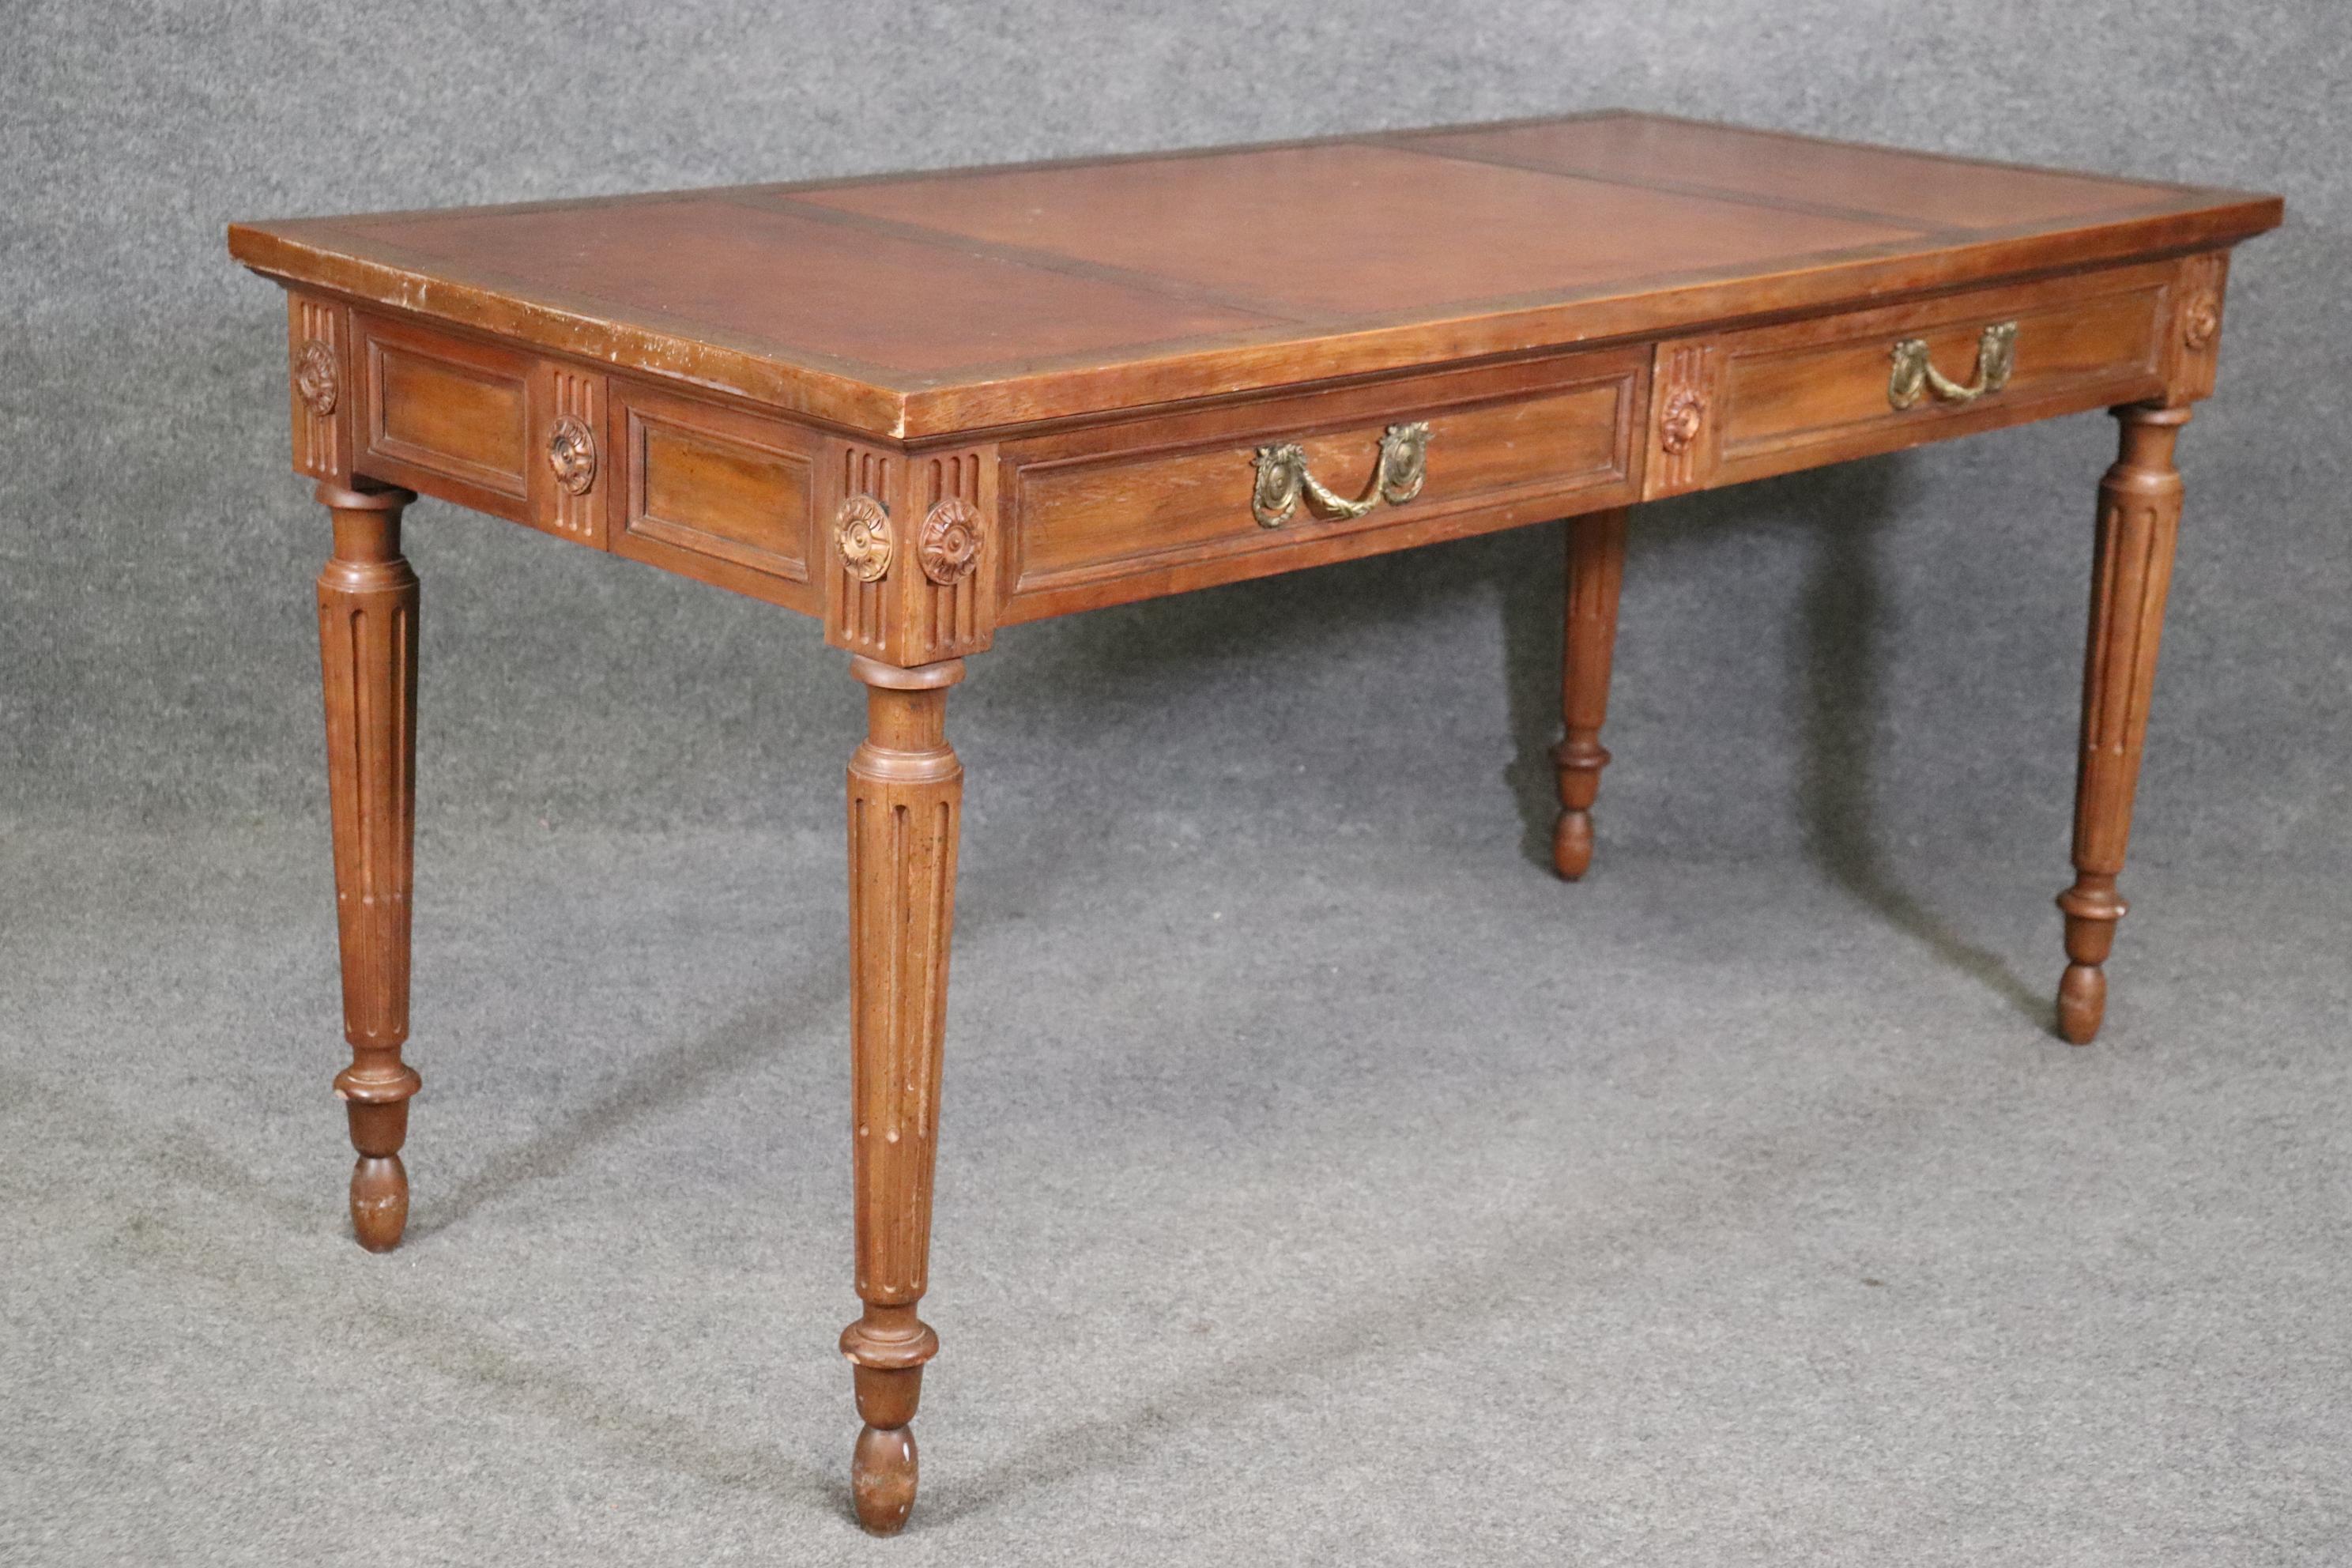 American Fine Quality Baker Furniture Company Embossed Leather Top Louis XVI Style Desk 